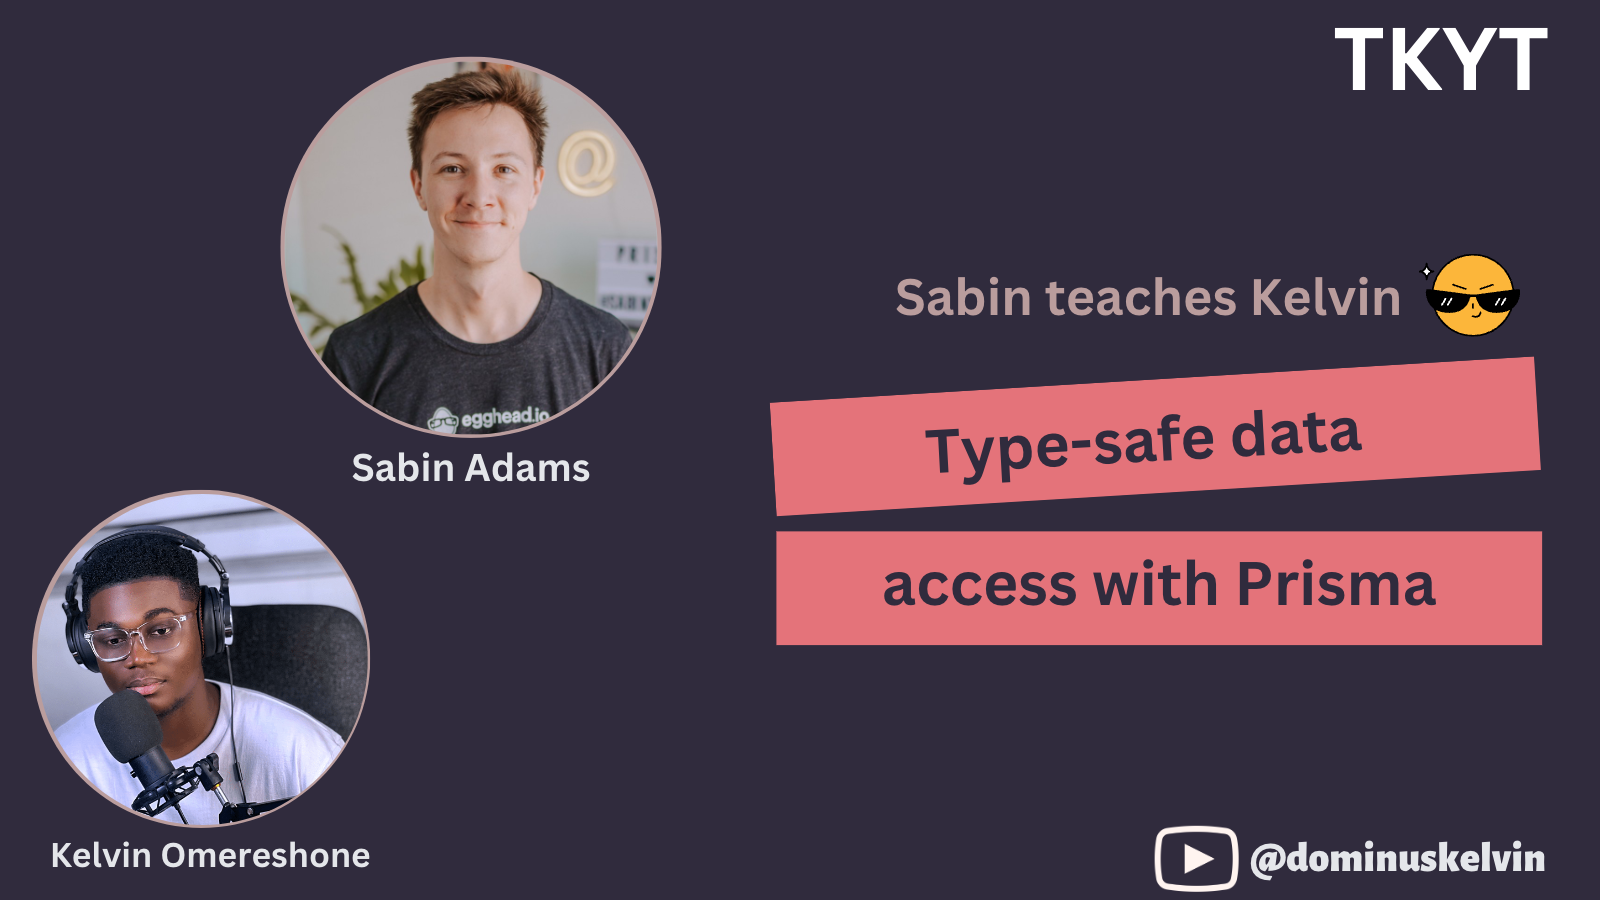 Type-safe data access with Prisma